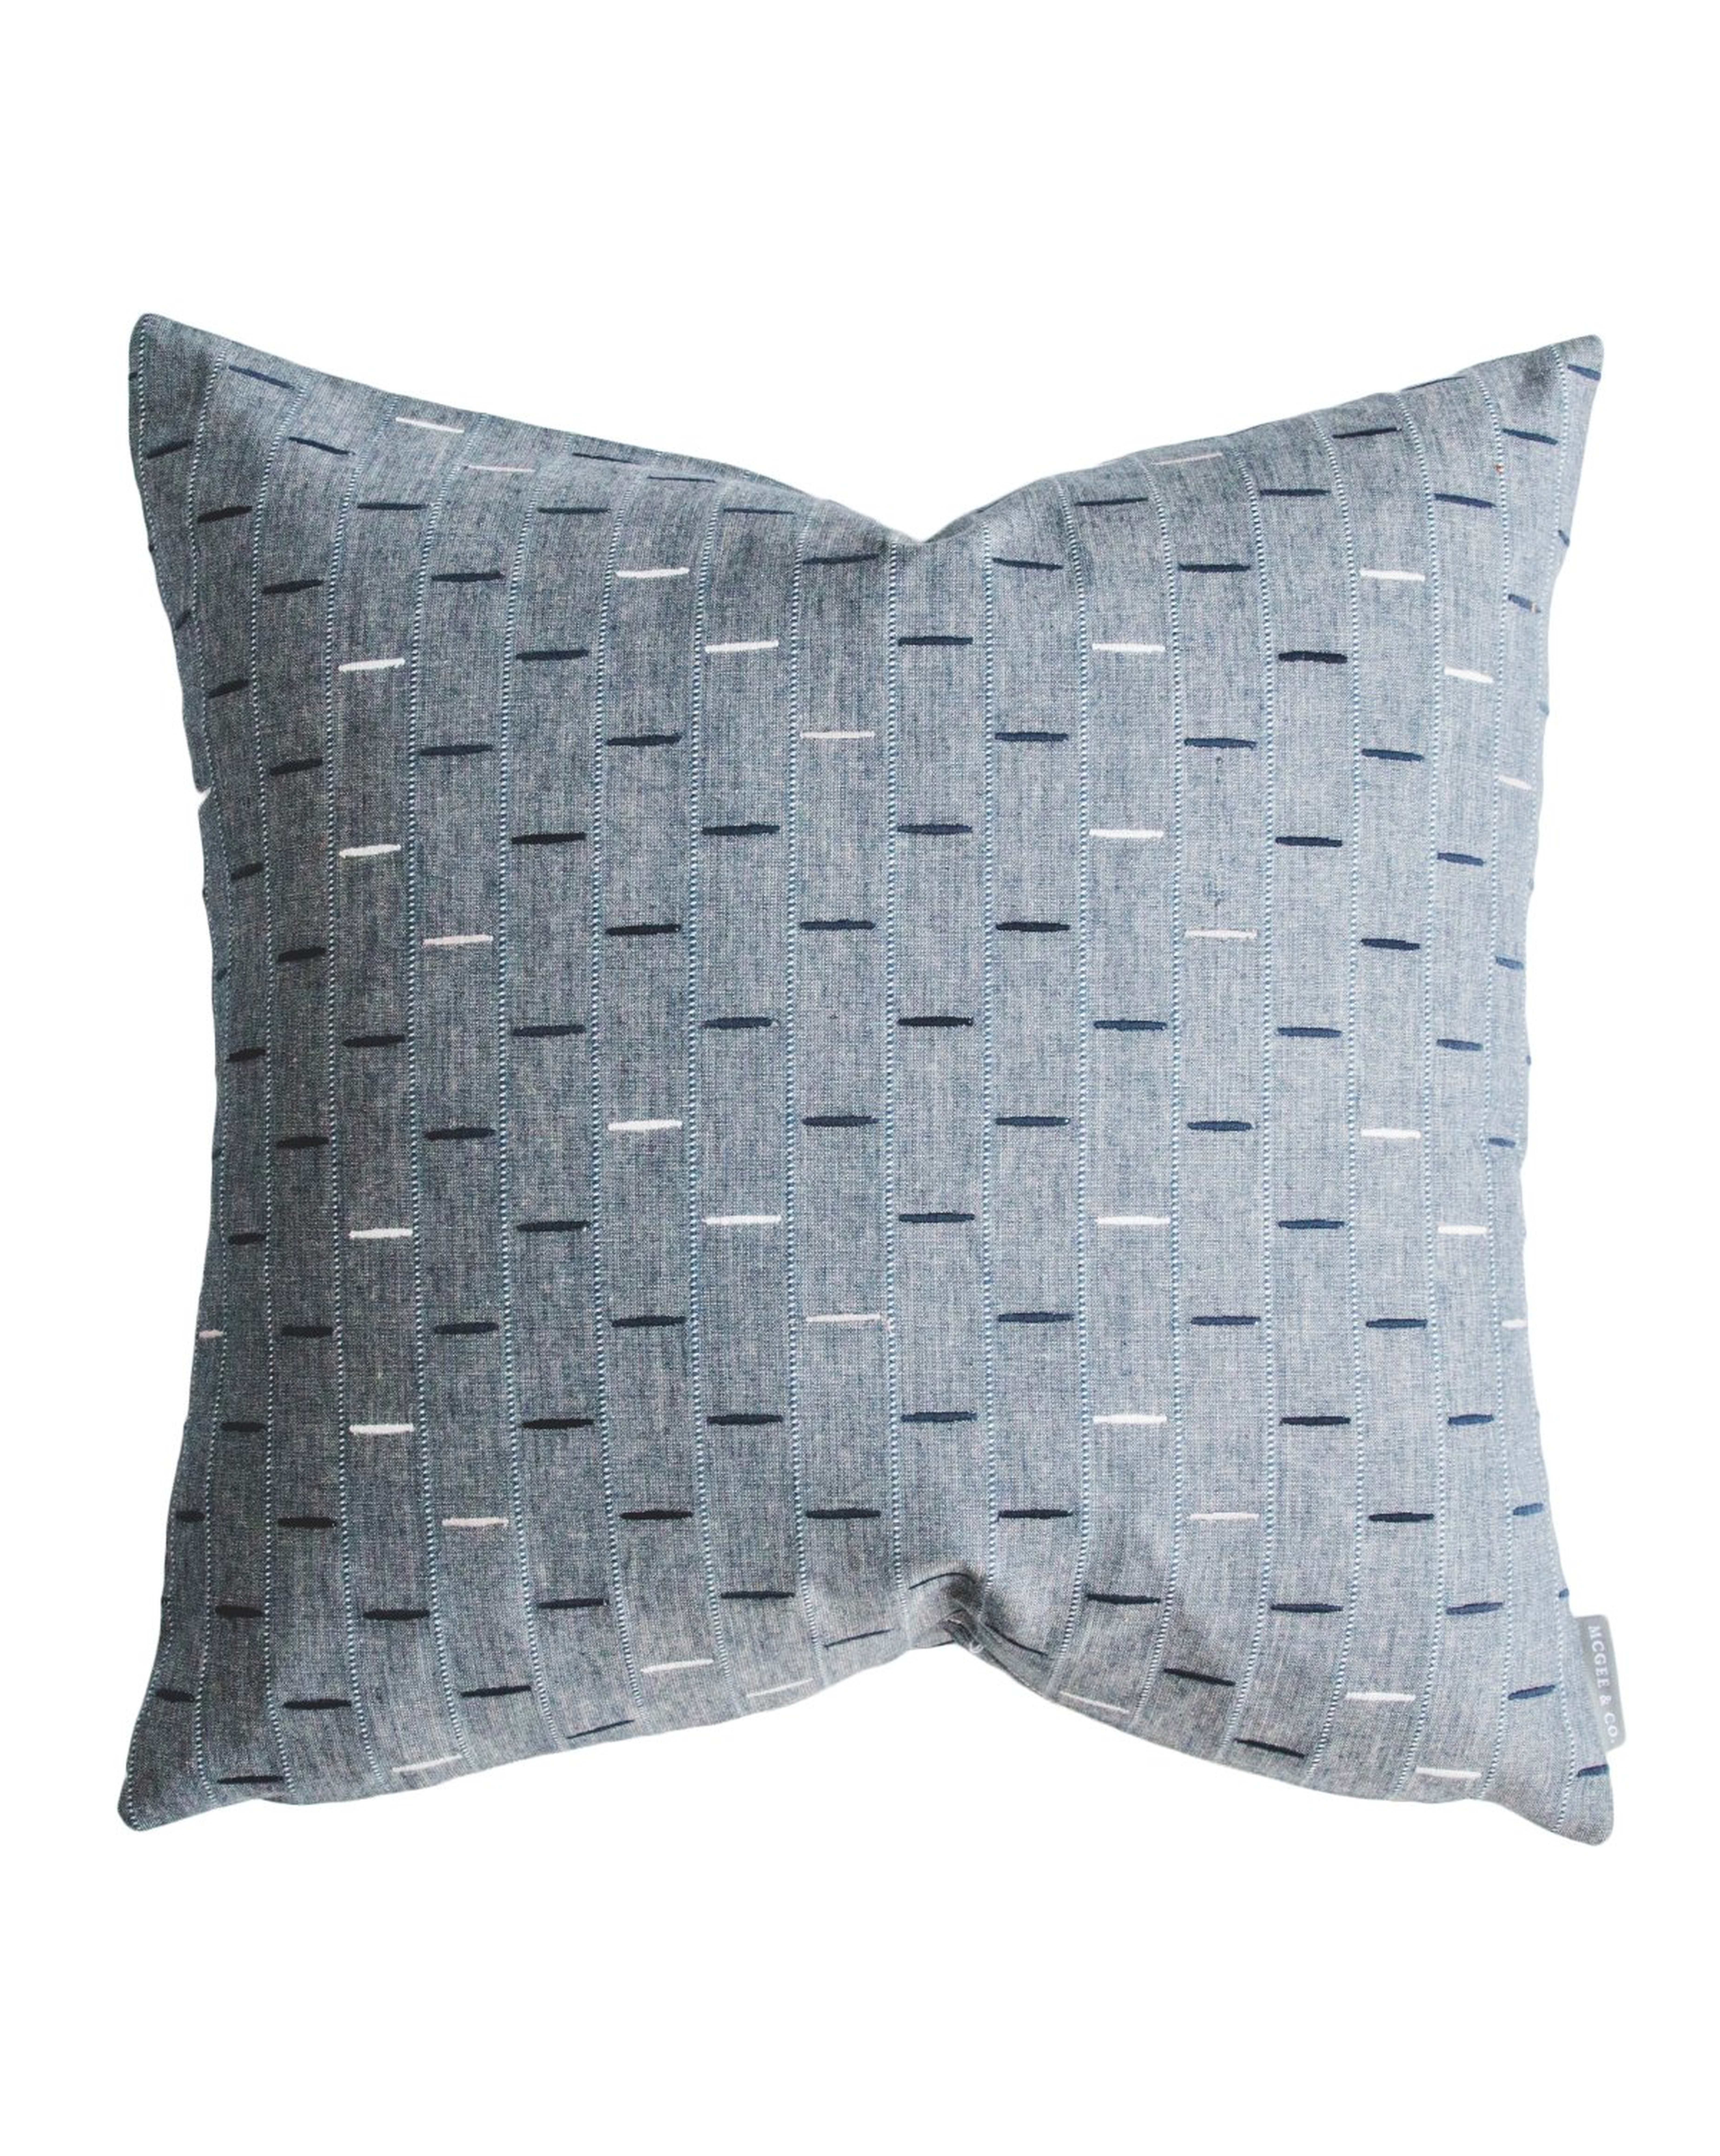 PIP PILLOW COVER - 20" x 20" - McGee & Co.